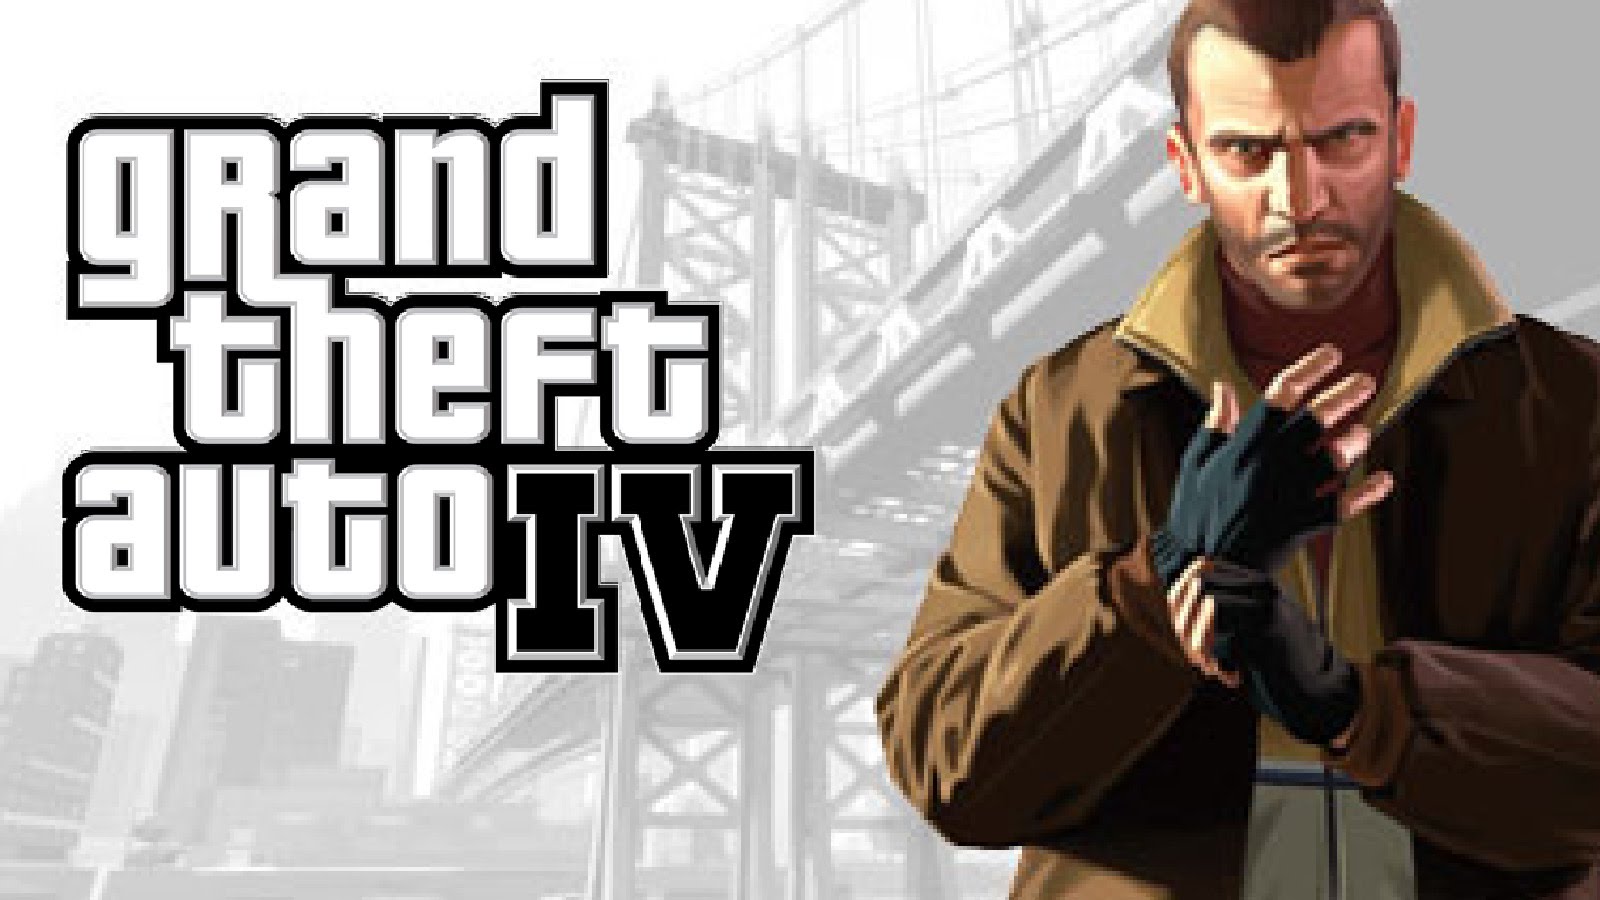 Gta 4 free. download full version android